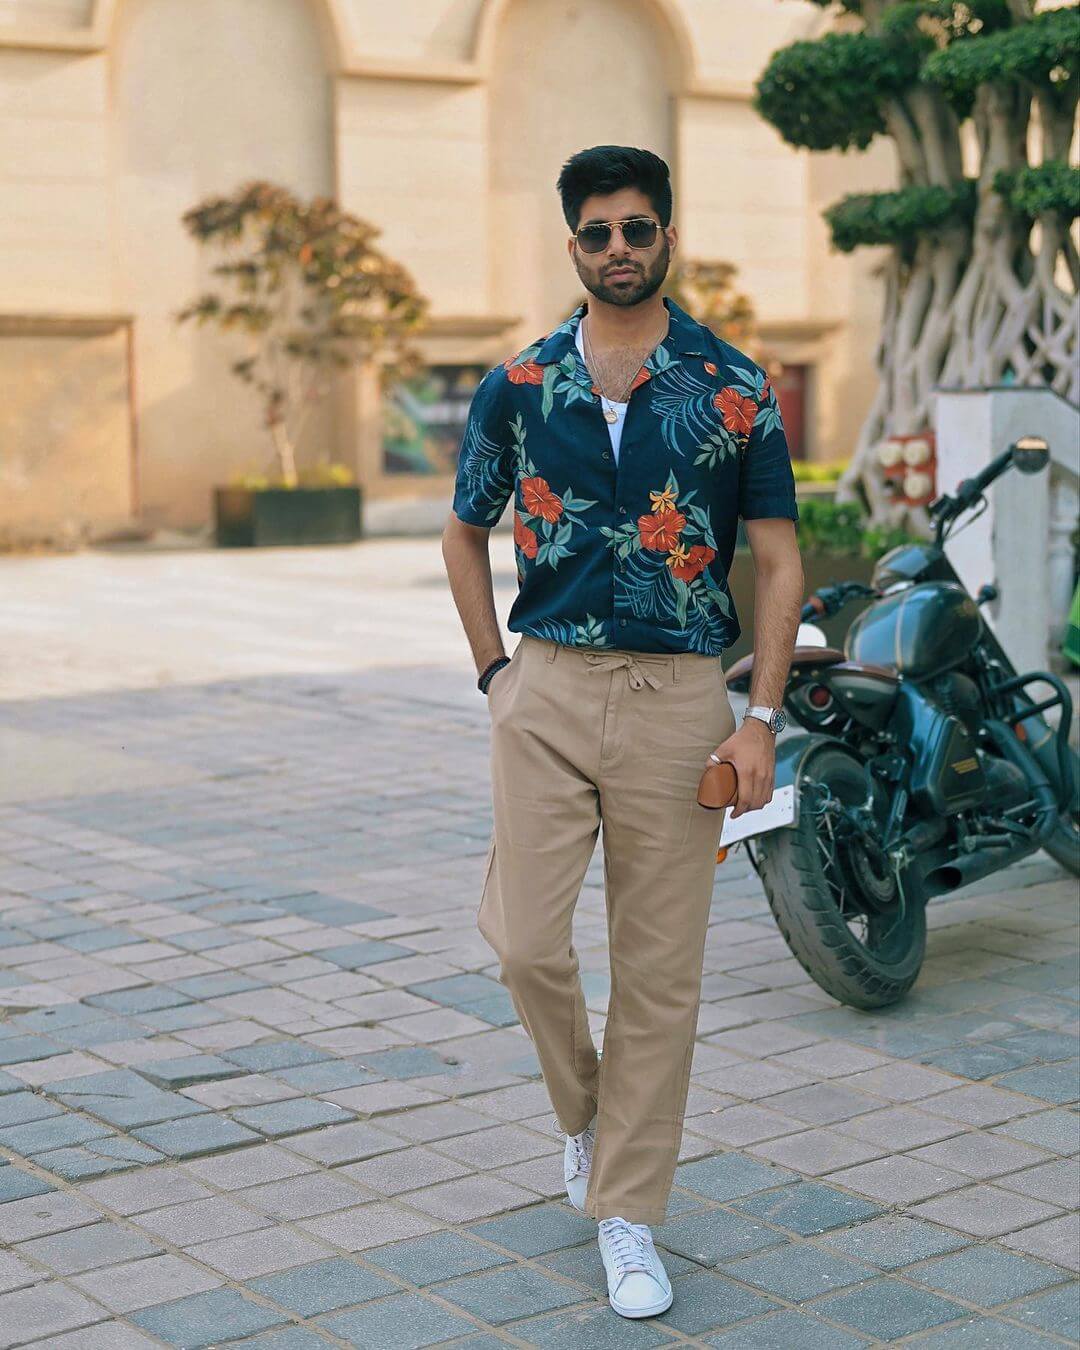 A floral printed shirt idea, perfect for summer.